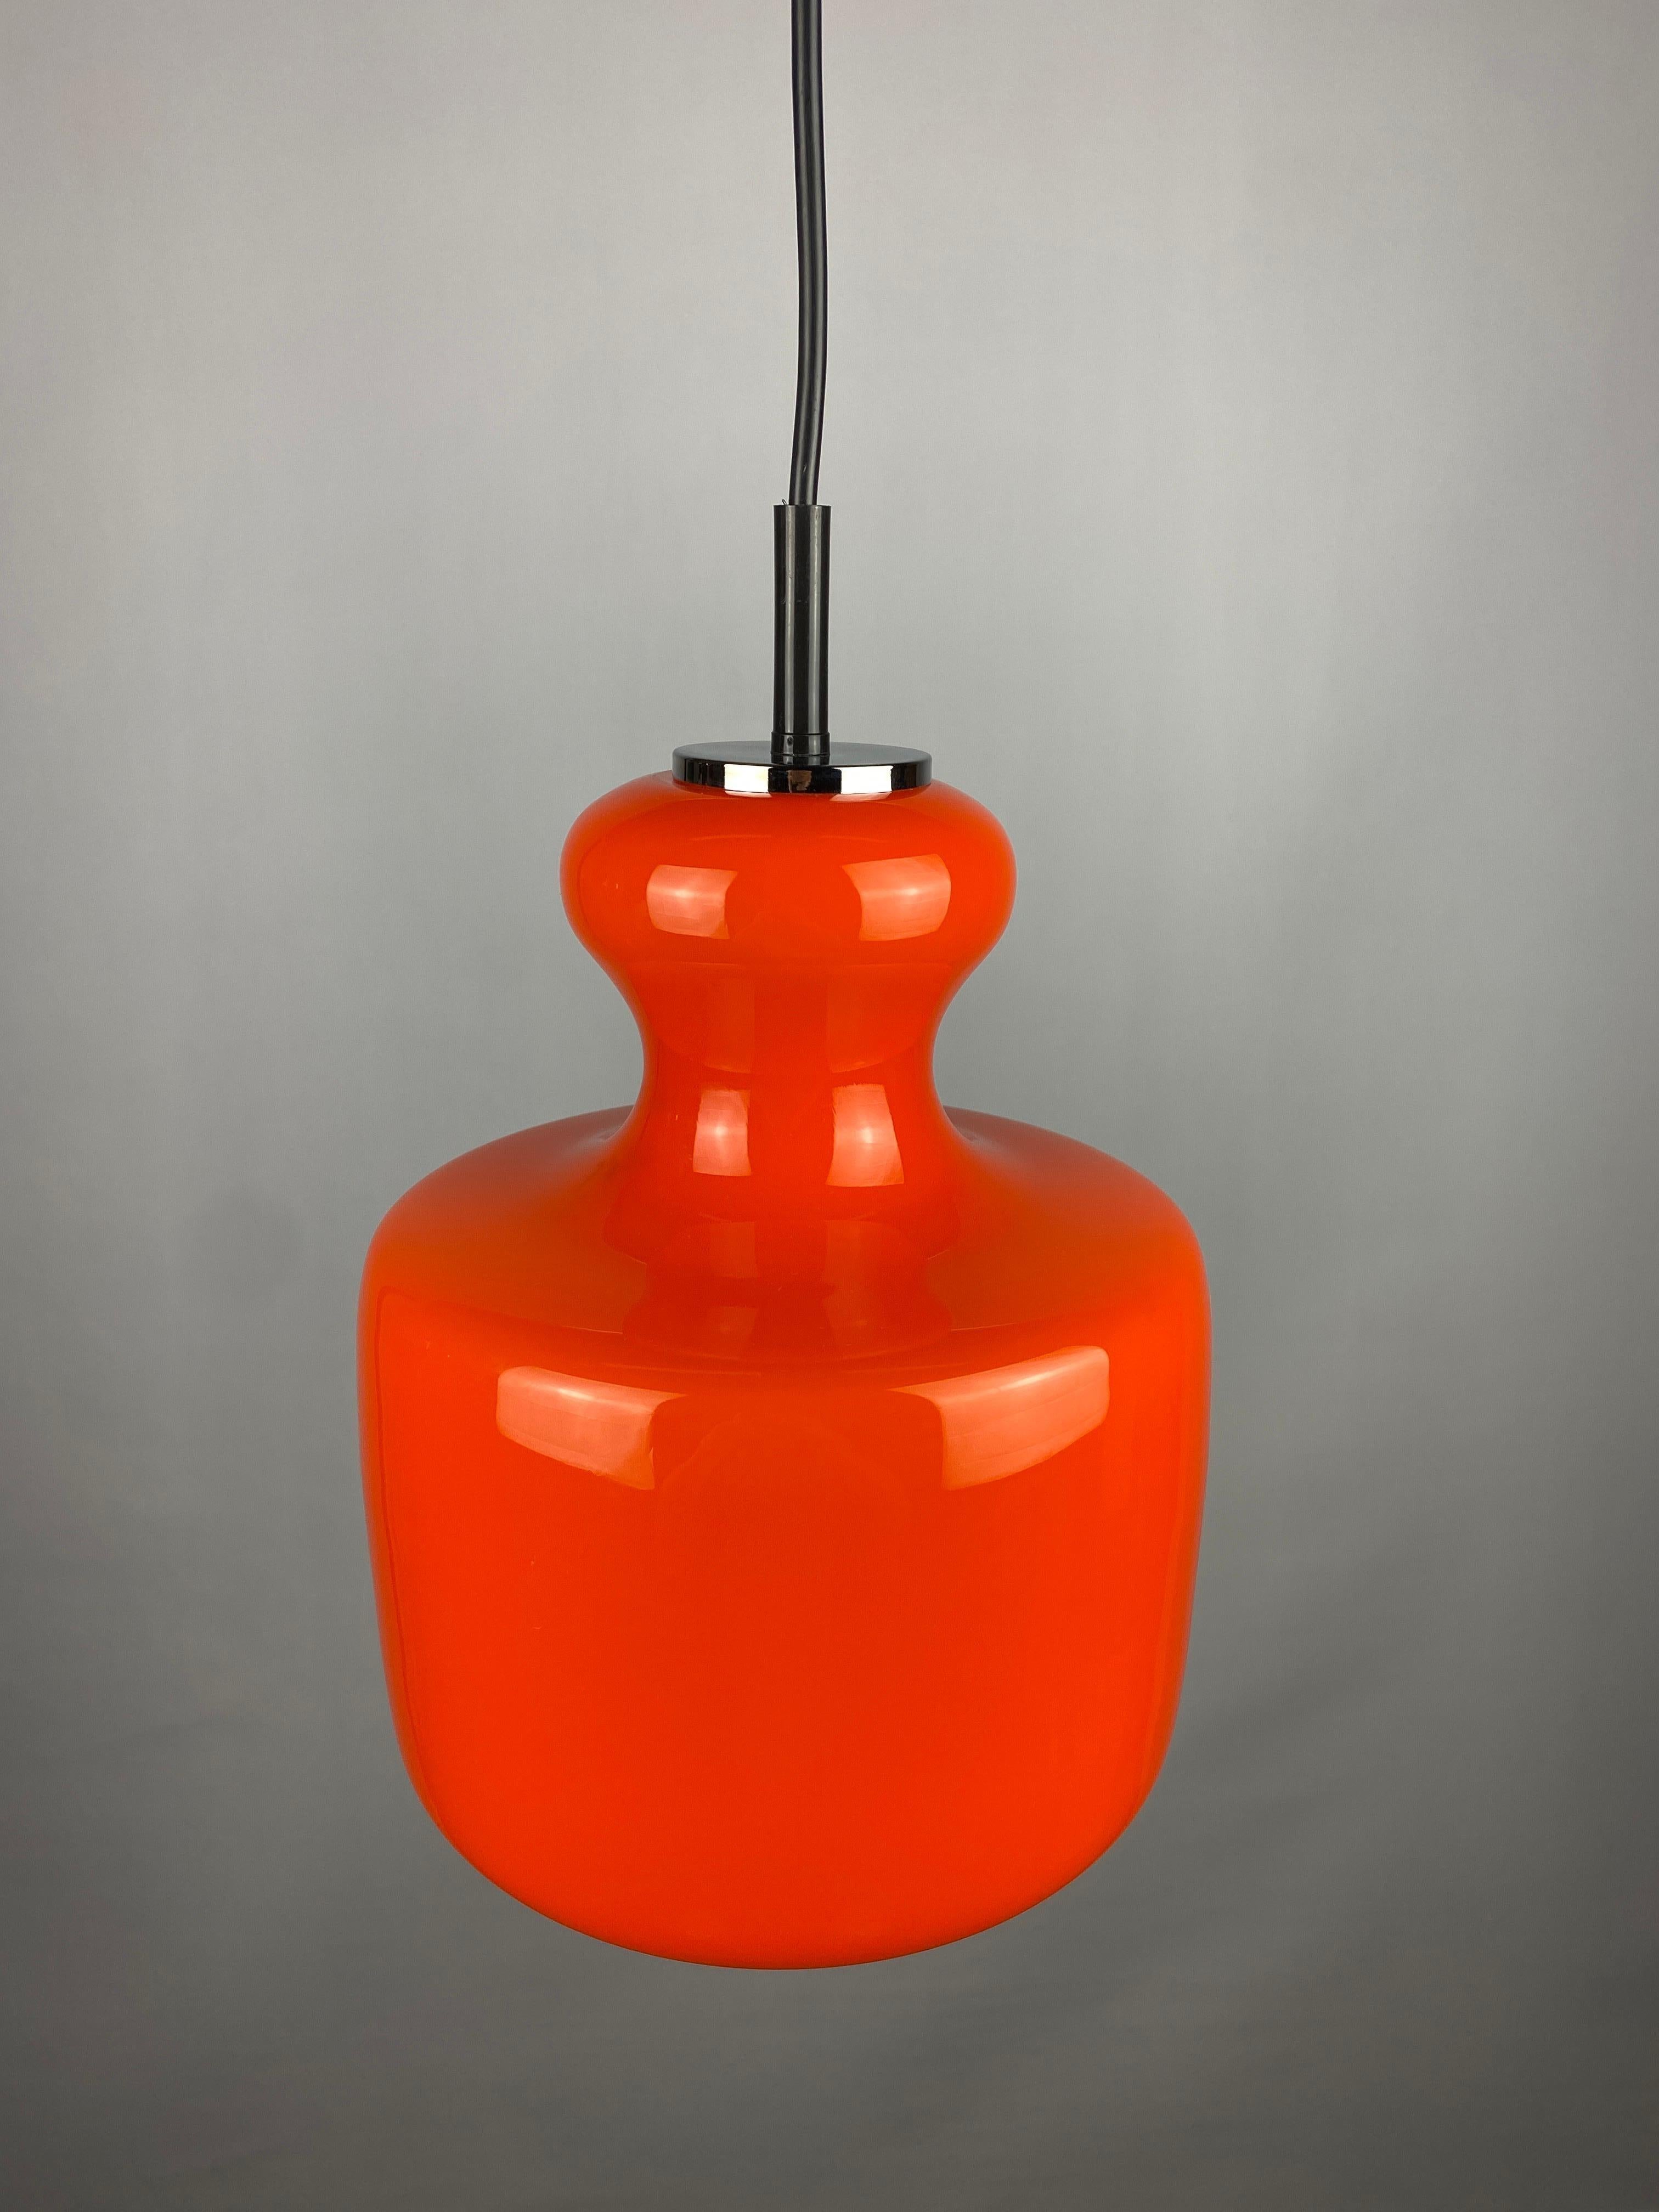 Beautiful German design by Peill and Putzler, produced around 1960. Has a nice bright orange color and gives a very warm light. 

Typical design of the German makers, also resembles the Swedish designs. More colored glass pendant lights in